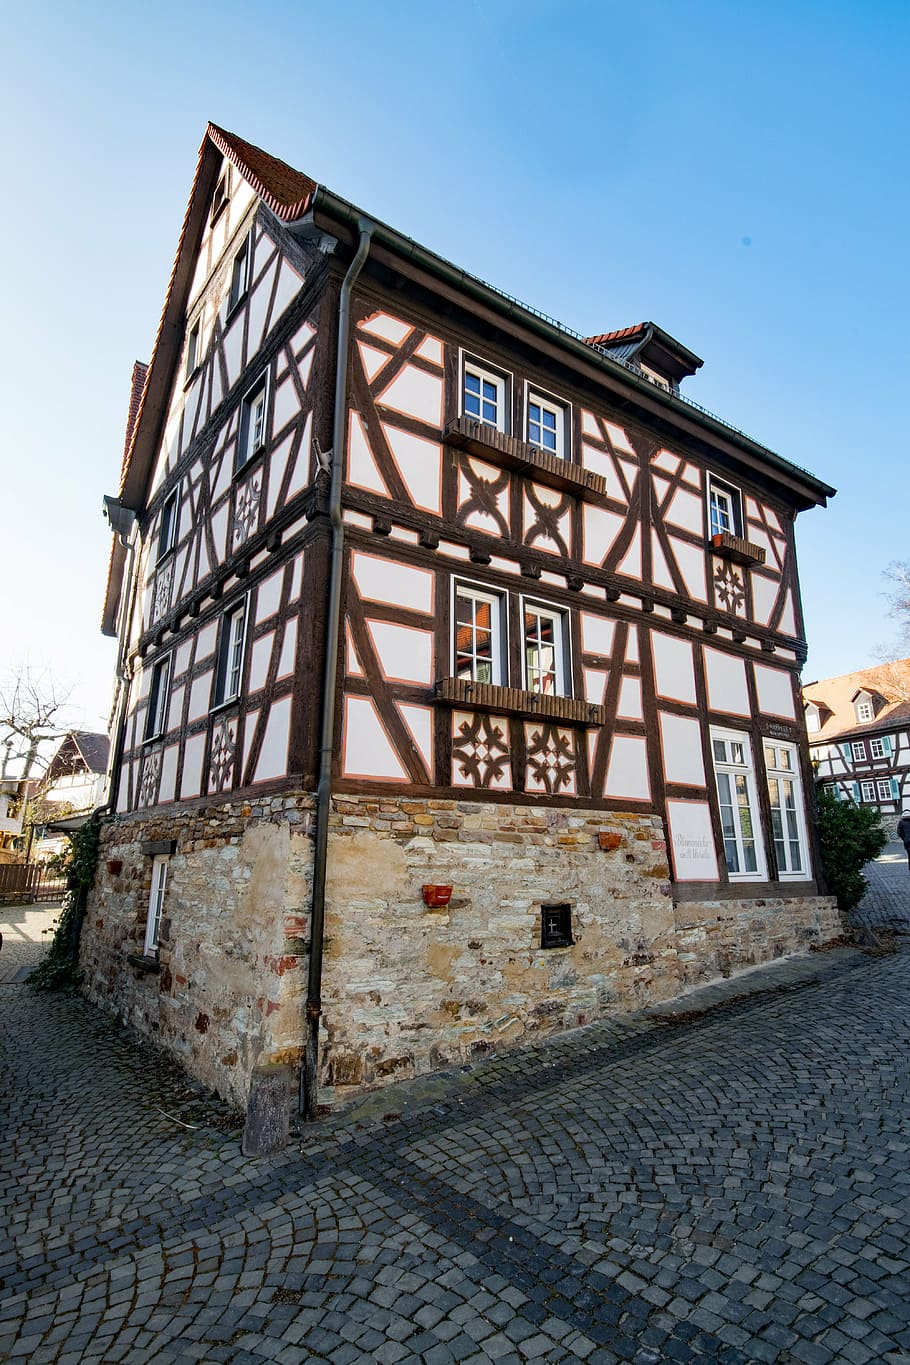 oberursel, hesse, germany, old town, truss, fachwerkhaus, places of interest, architecture, old, building Exterior